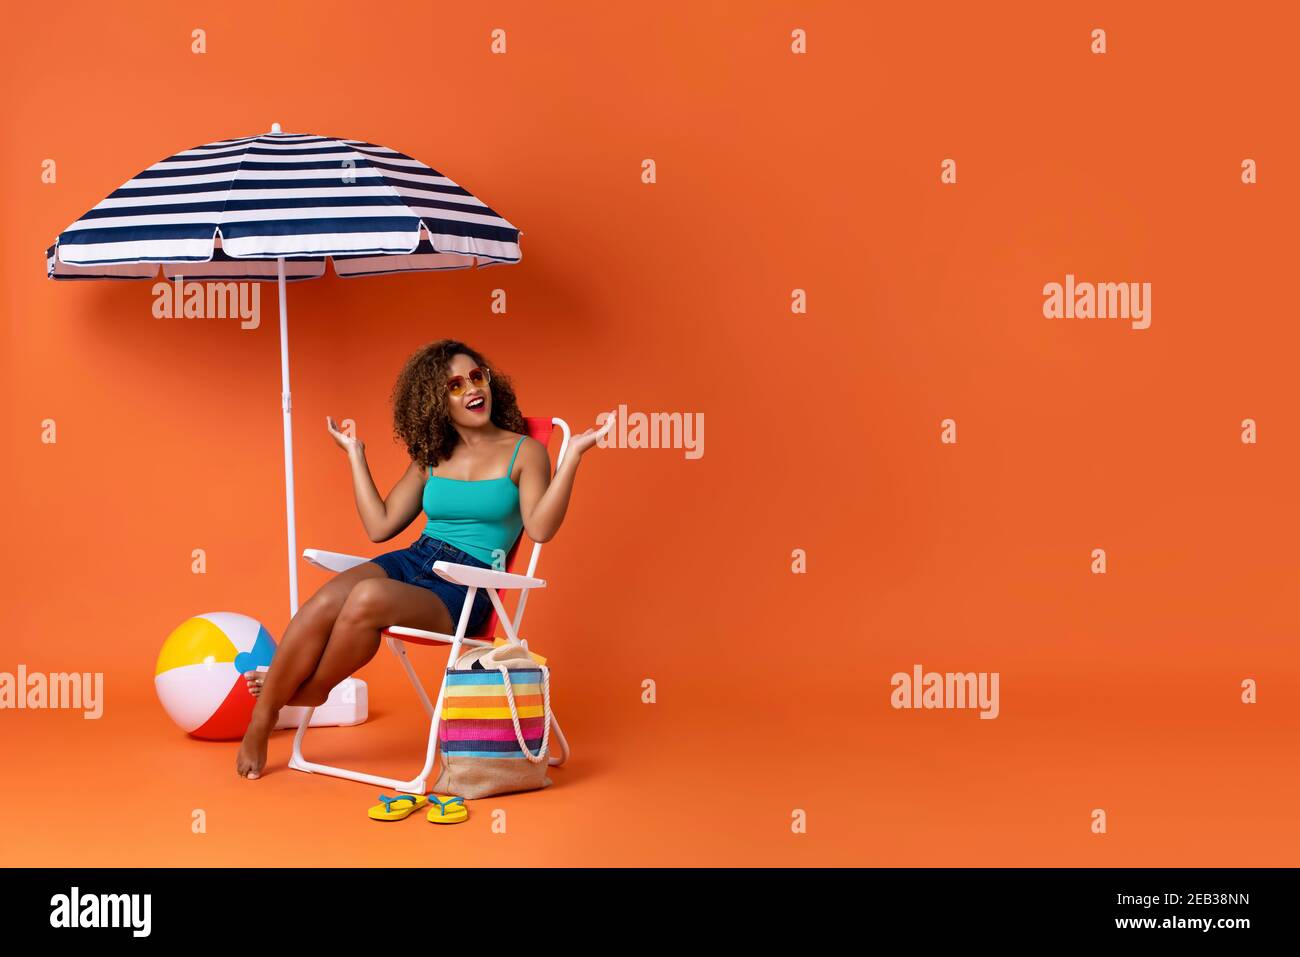 Beautiful African American woman sitting on a beach chair with colorful accessories and  umbrella in studio summer orange background with copy space Stock Photo